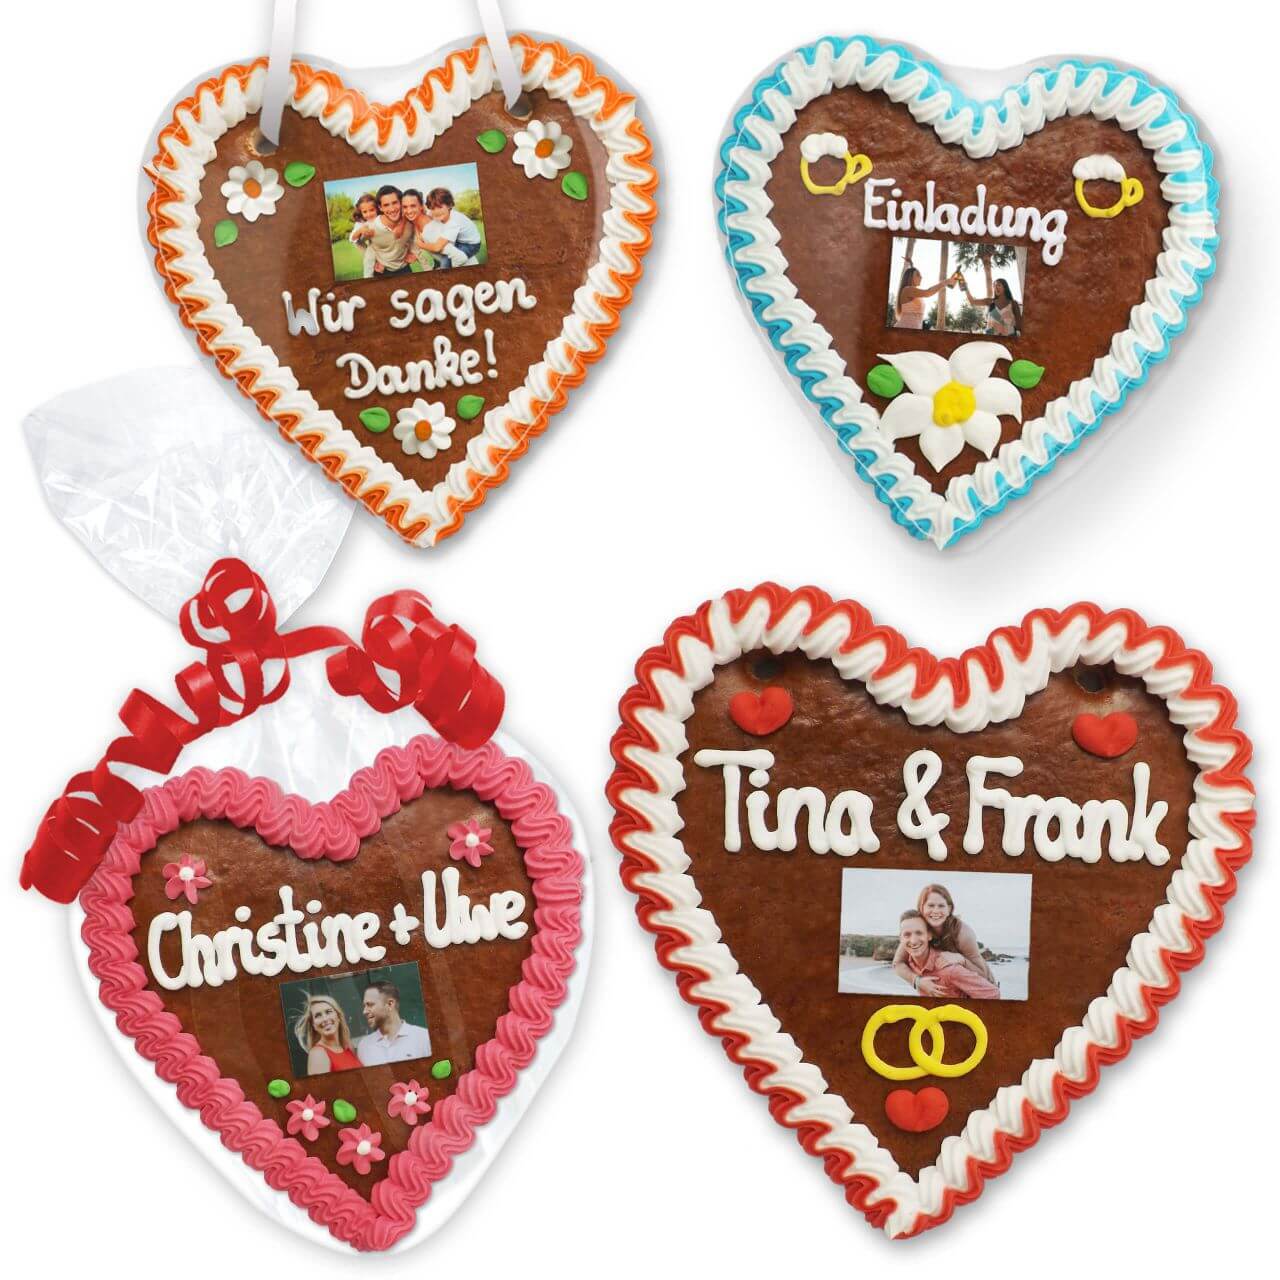 Personalized gingerbread heart with wish text and photo 16cm